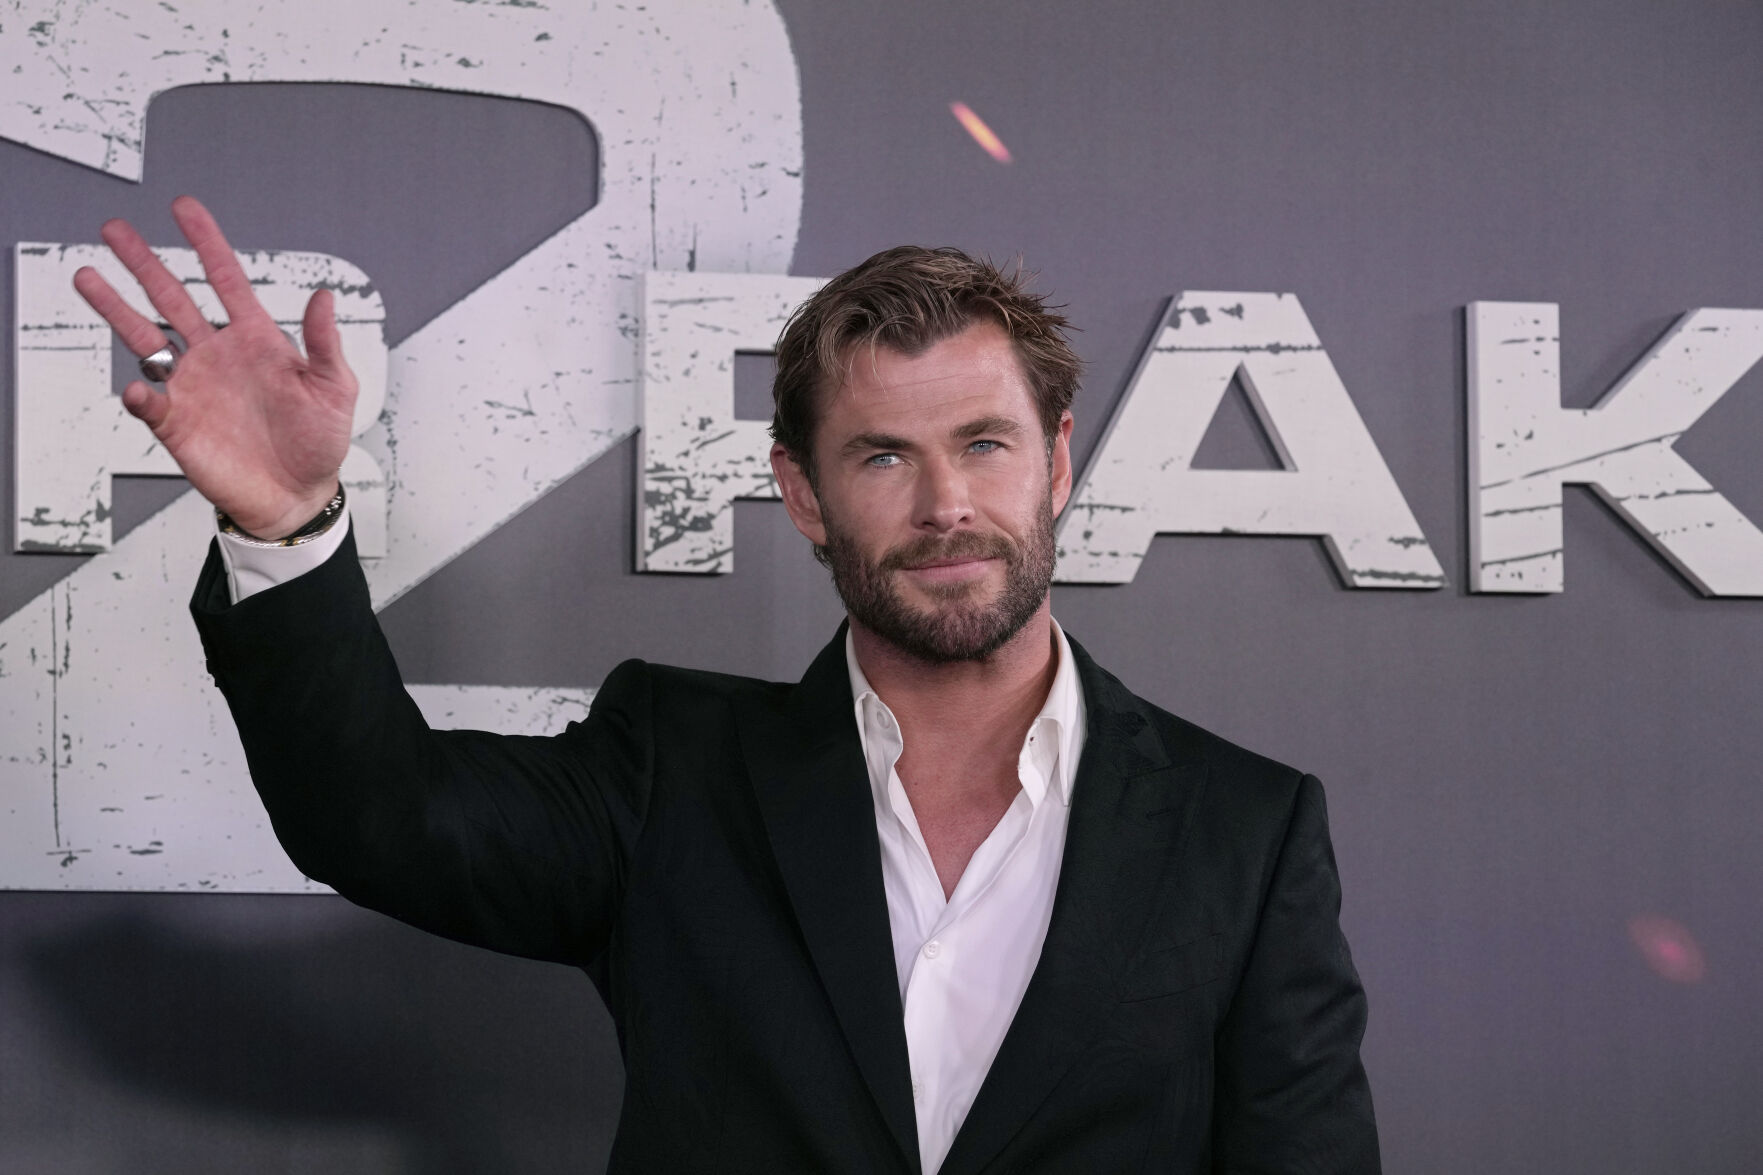 Actor Chris Hemsworth poses during a photocall for the Extraction 2 movie premiere in Madrid, Spain